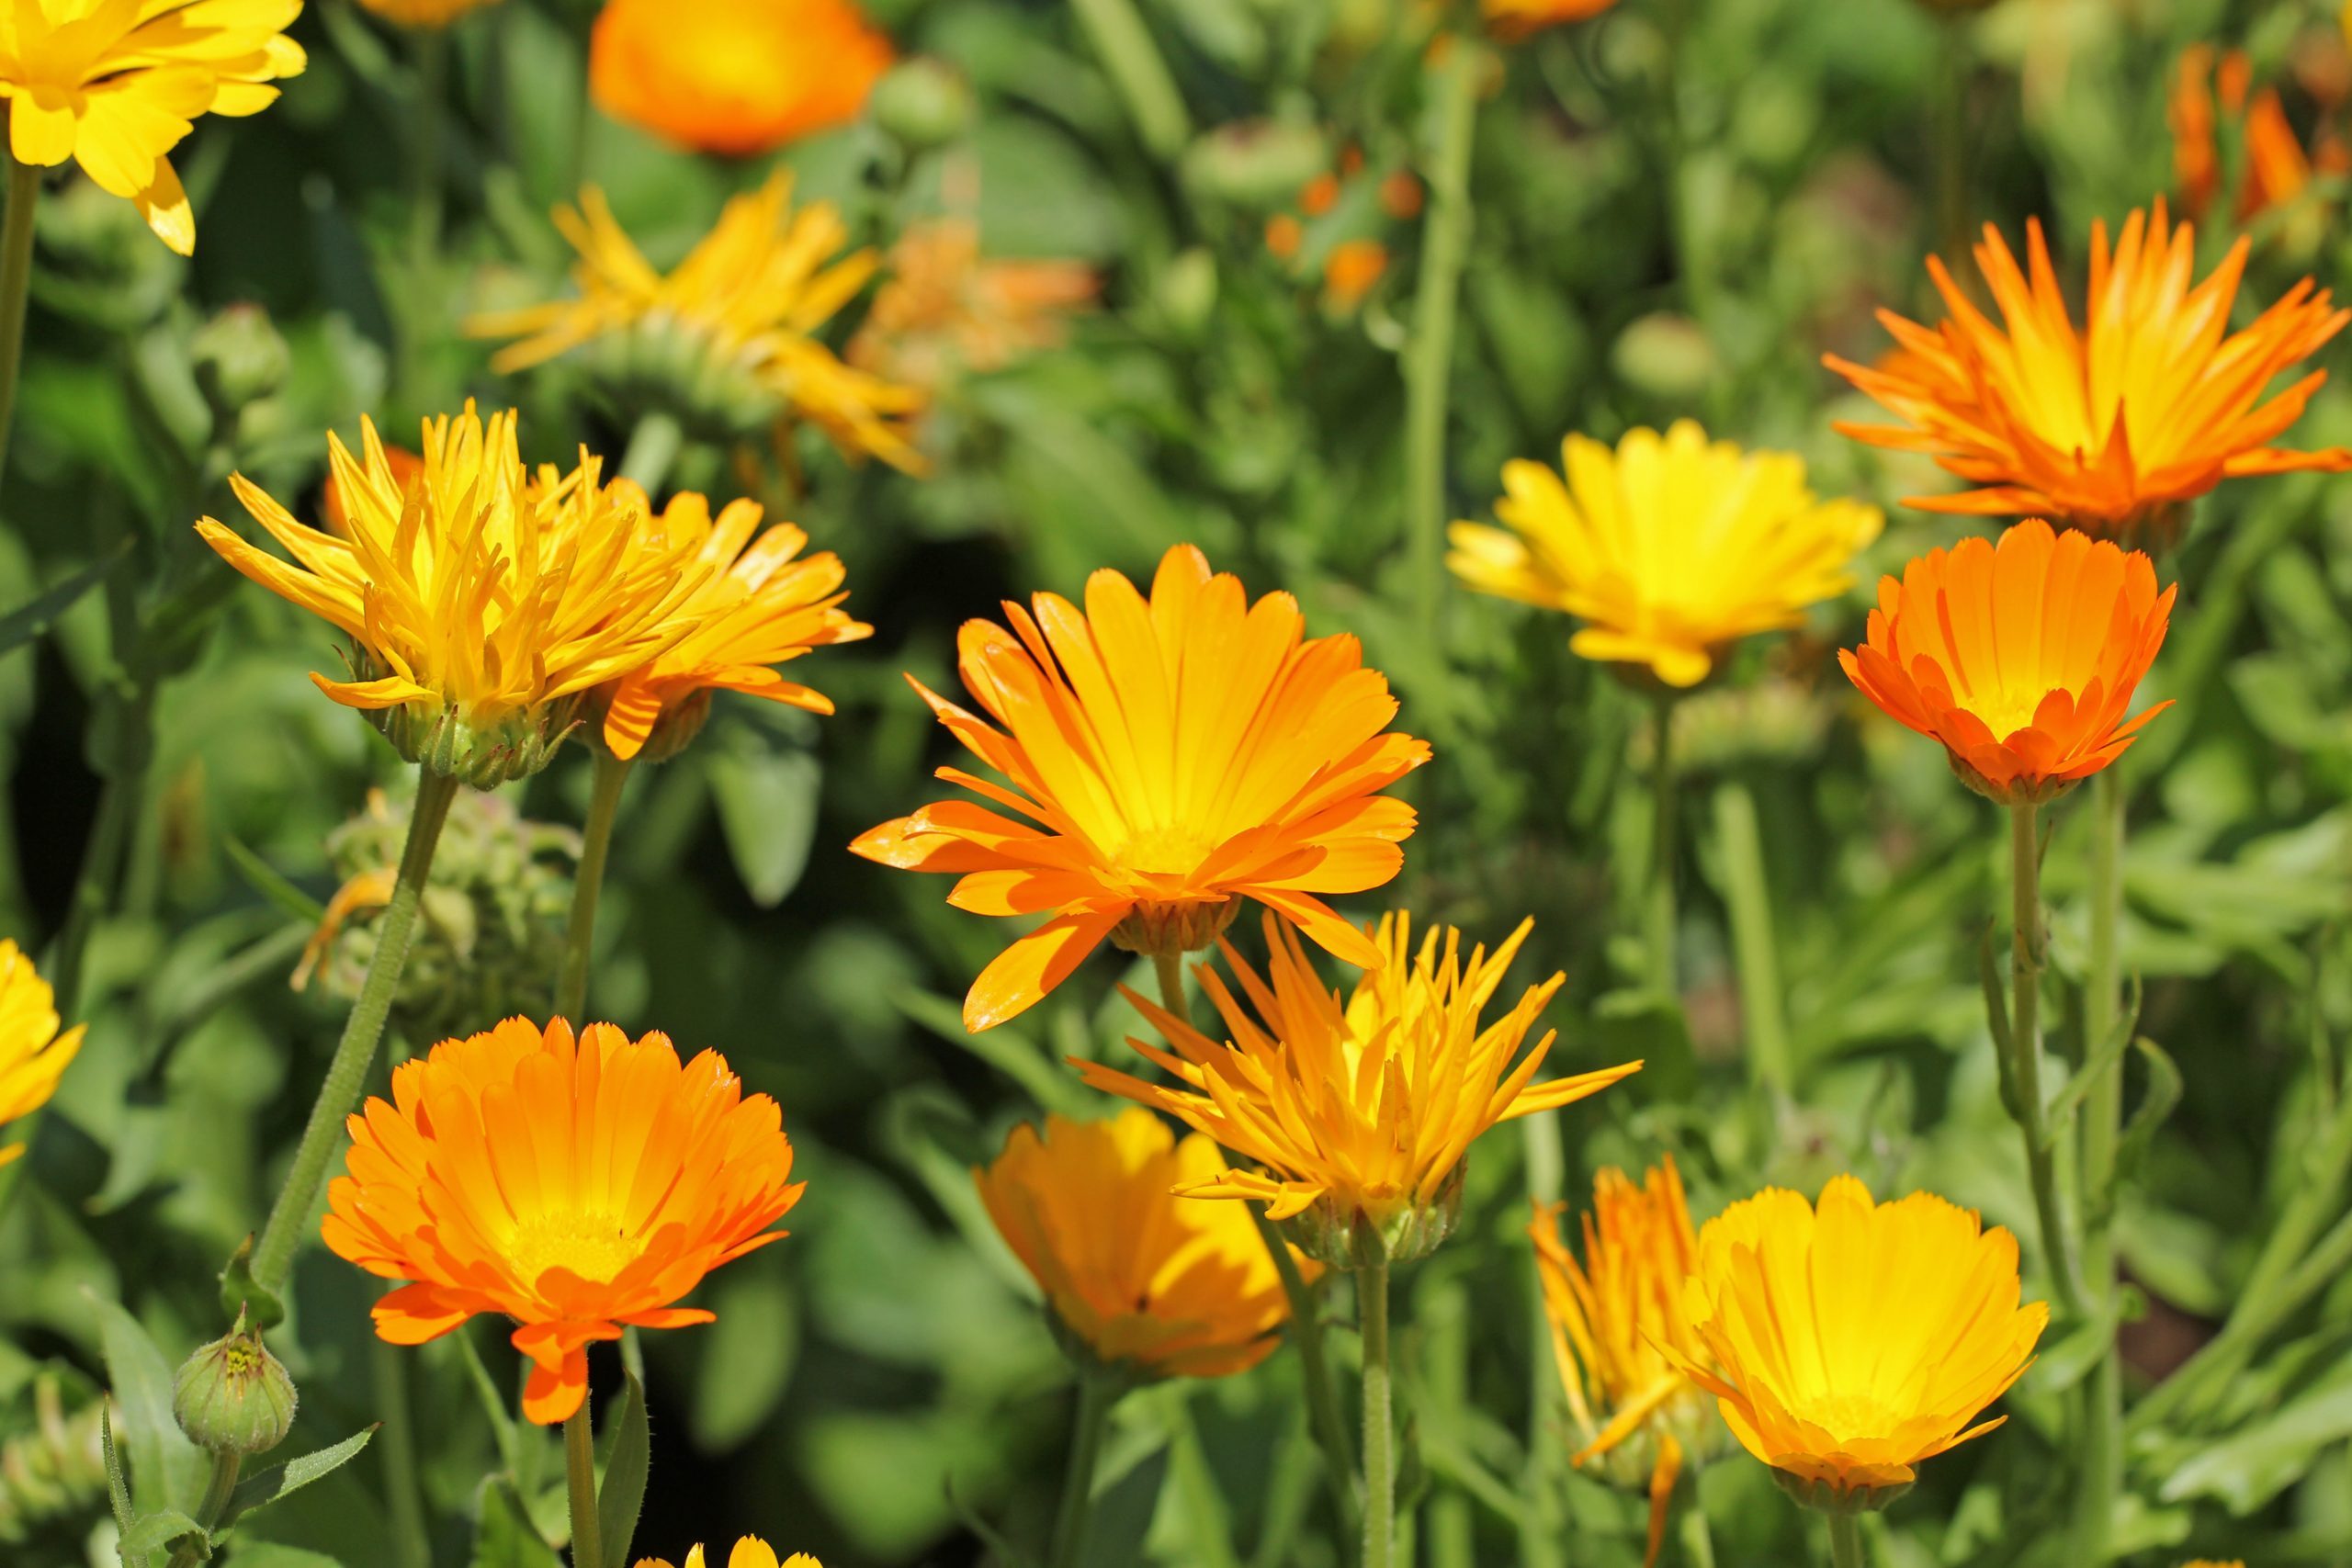 Calendula vs Marigold: What's the Difference?